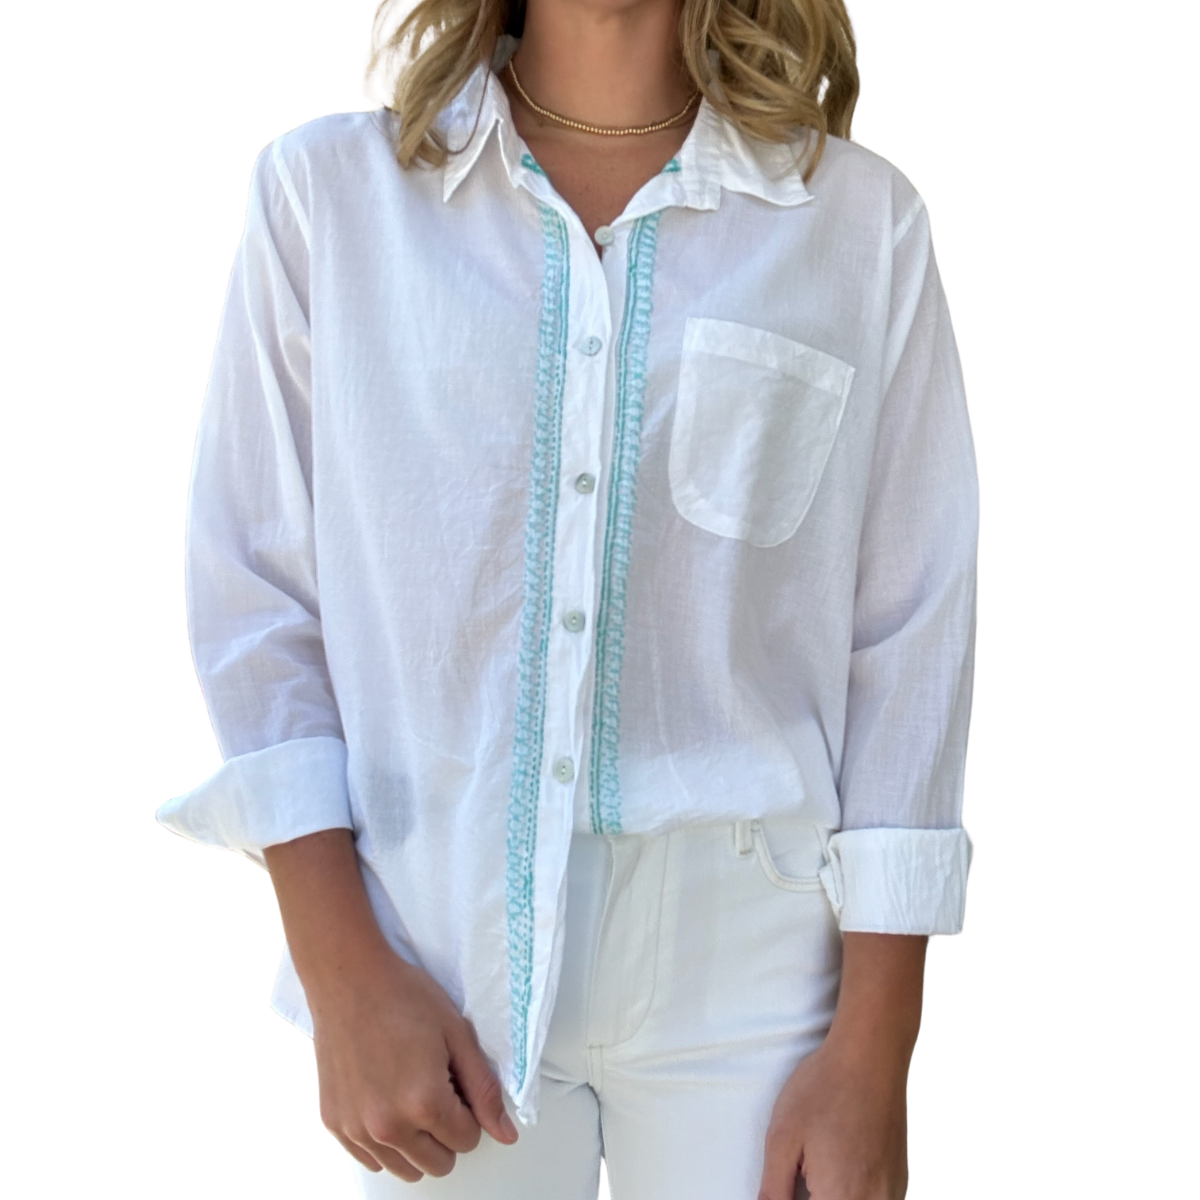 Everyday Boyfriend Shirt - White with Green & Blue Embroidery